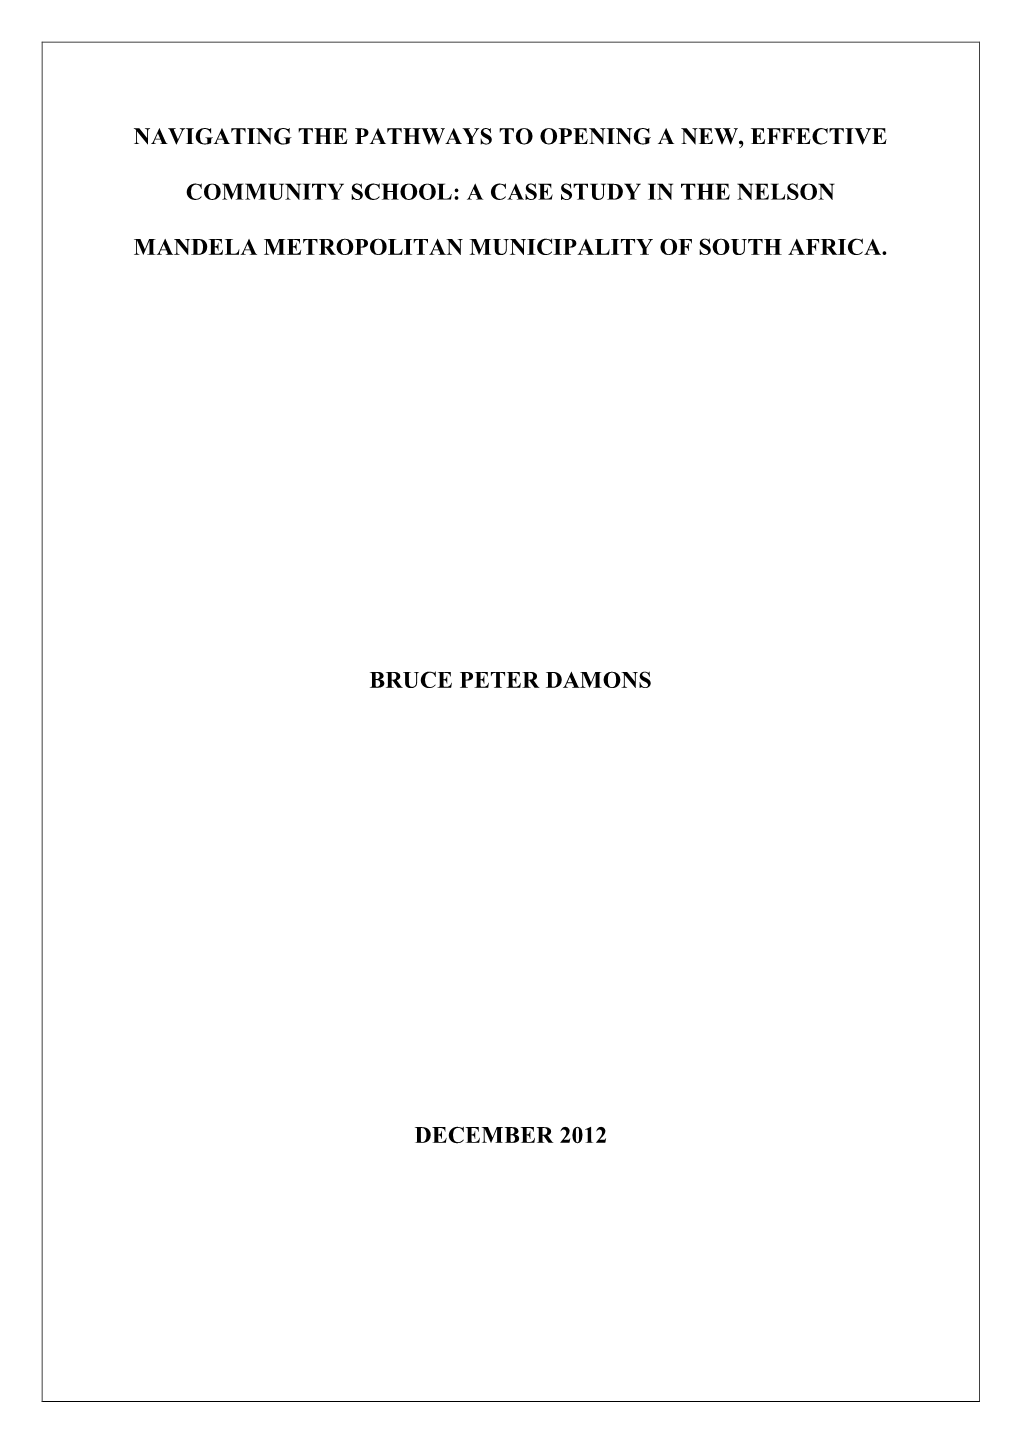 A CASE STUDY in the NELSON MANDELA METROPOLITAN MUNICIPALITY of SOUTH AFRICA by Bruce Peter Damons (59809795)